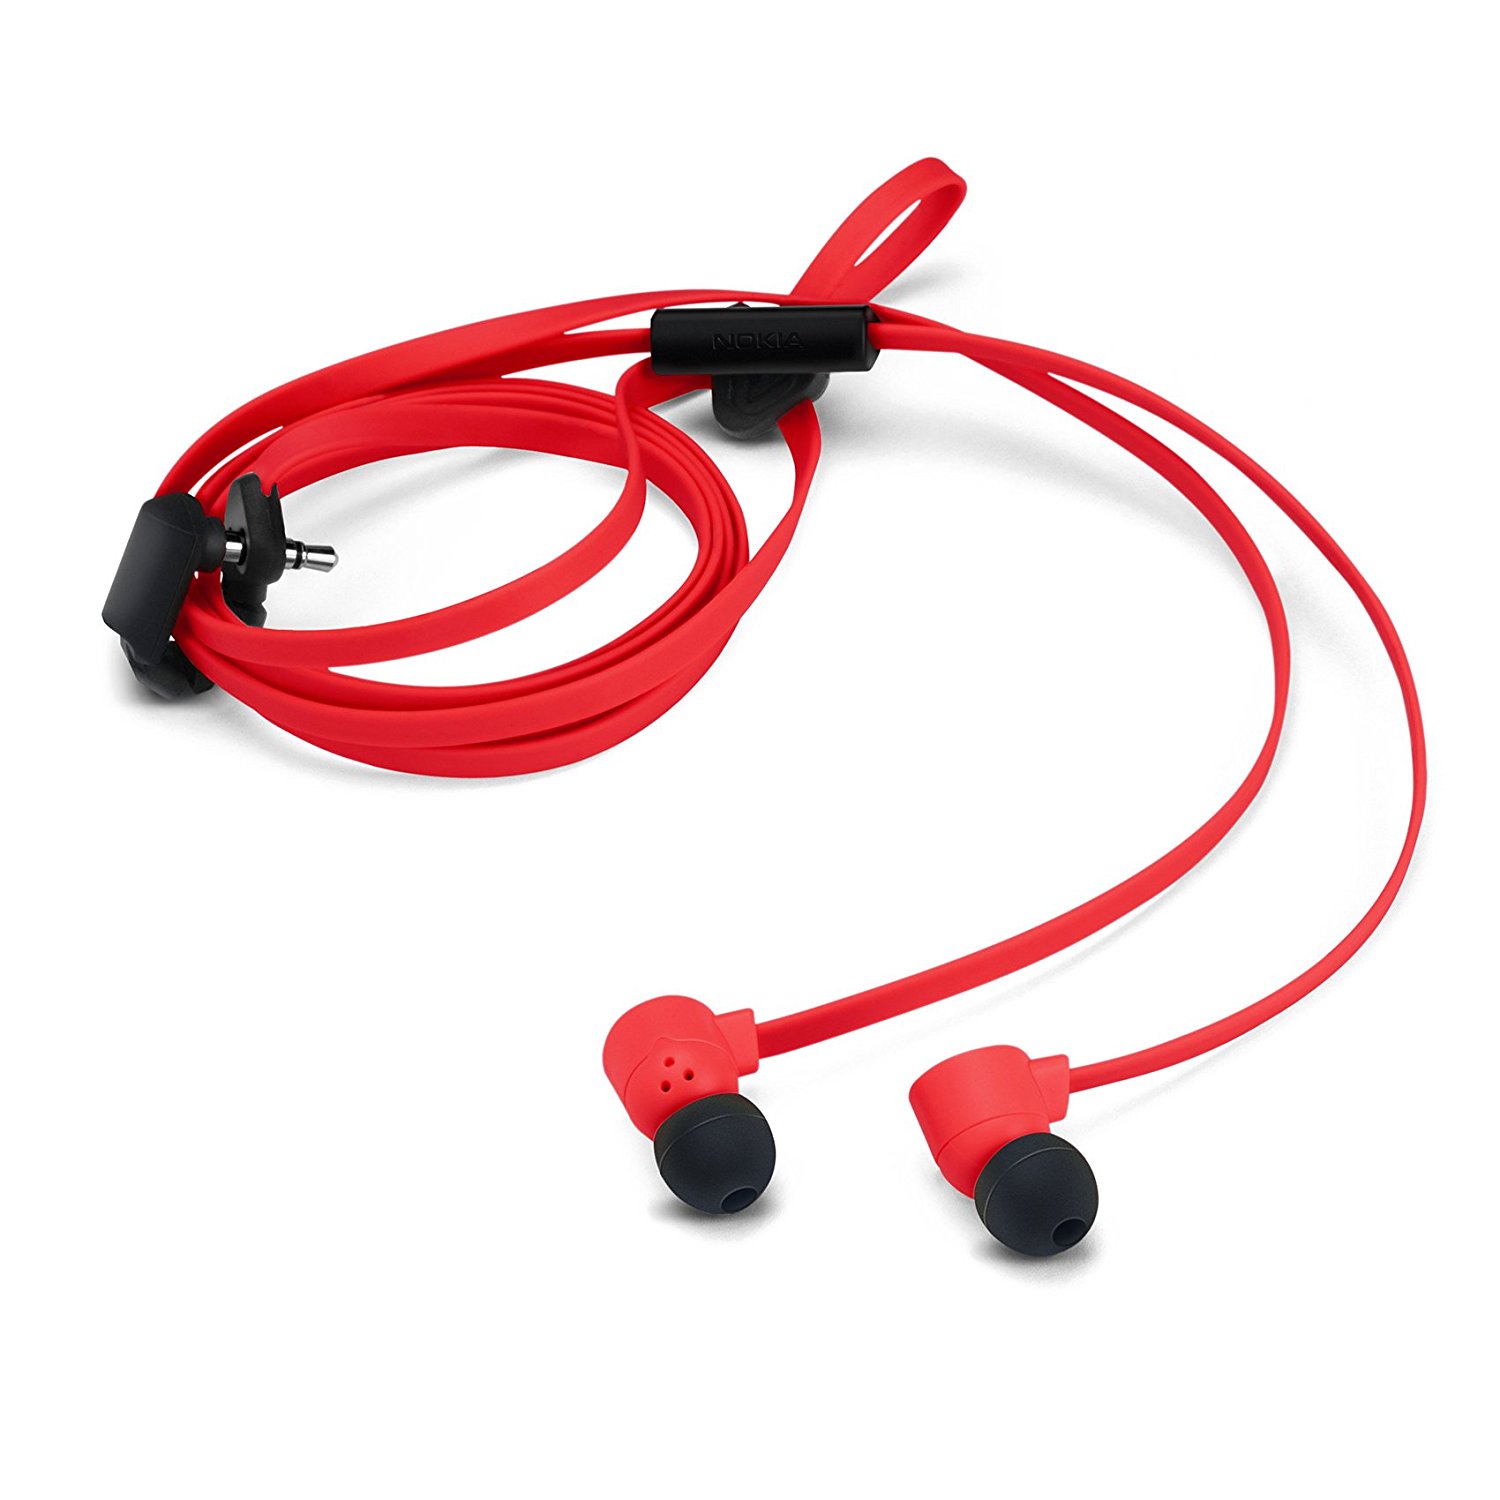 Nokia Coloud Pop In-Ear Headphones with Integrated Mic: Amazon.co.uk ...